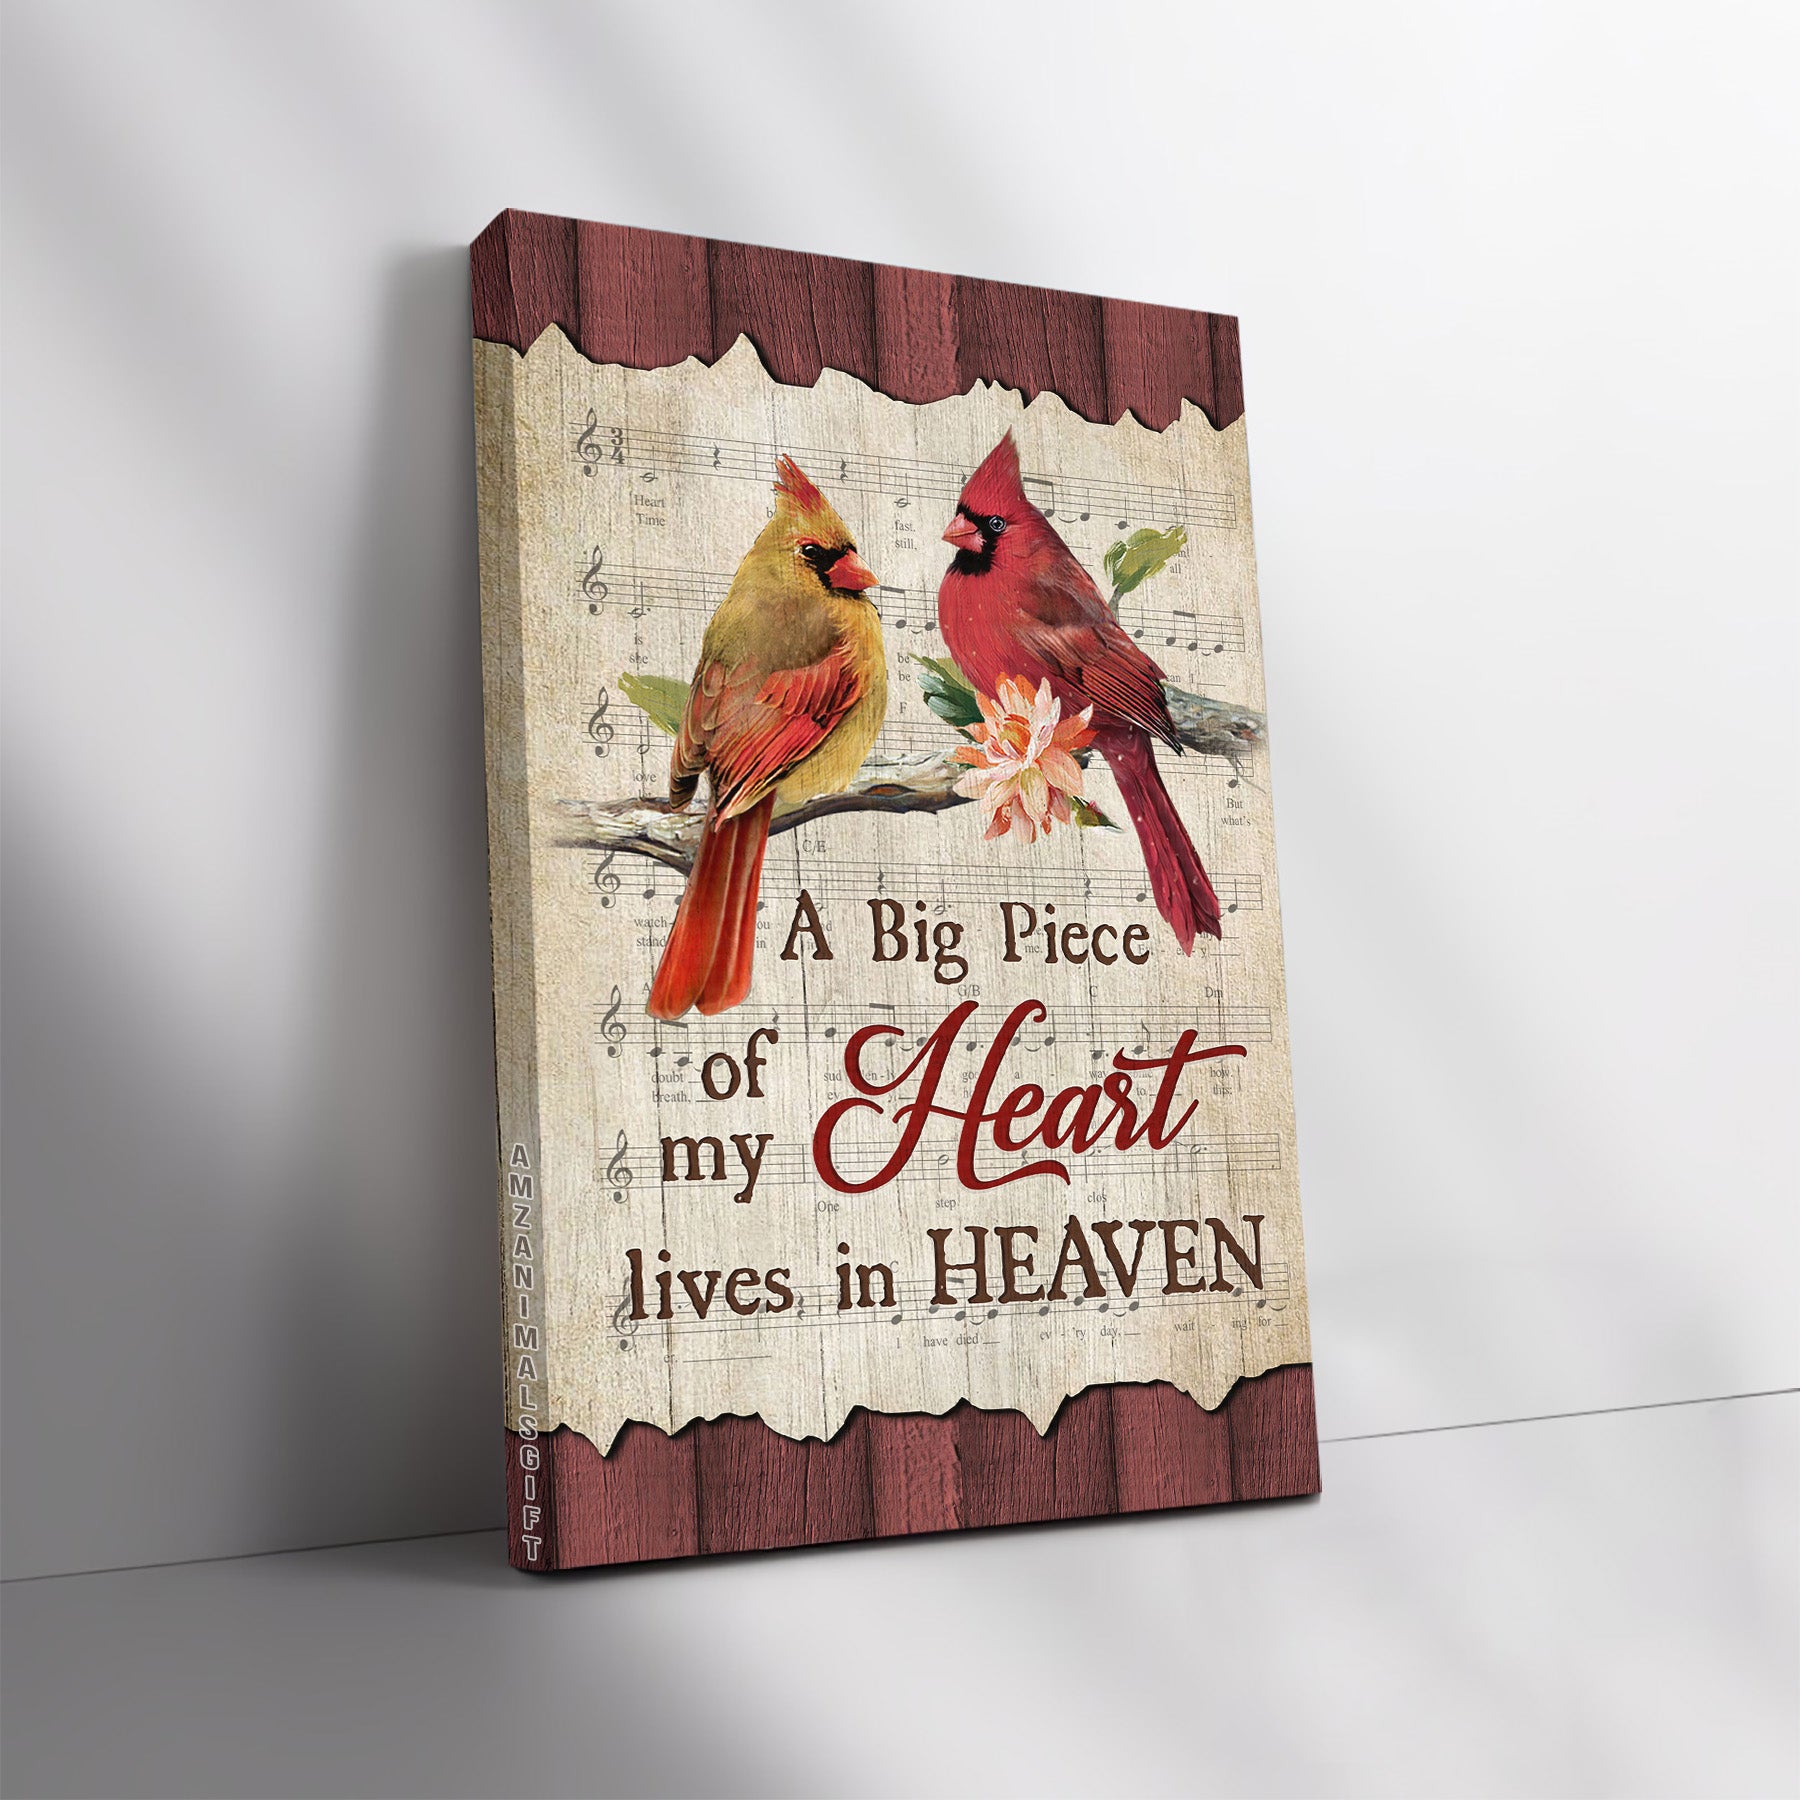 Memorial Premium Wrapped Portrait Canvas - Bird Couple, Male And Female Cardinals, A Piece Of My Heart In Heaven - Heaven Gift For Members Family